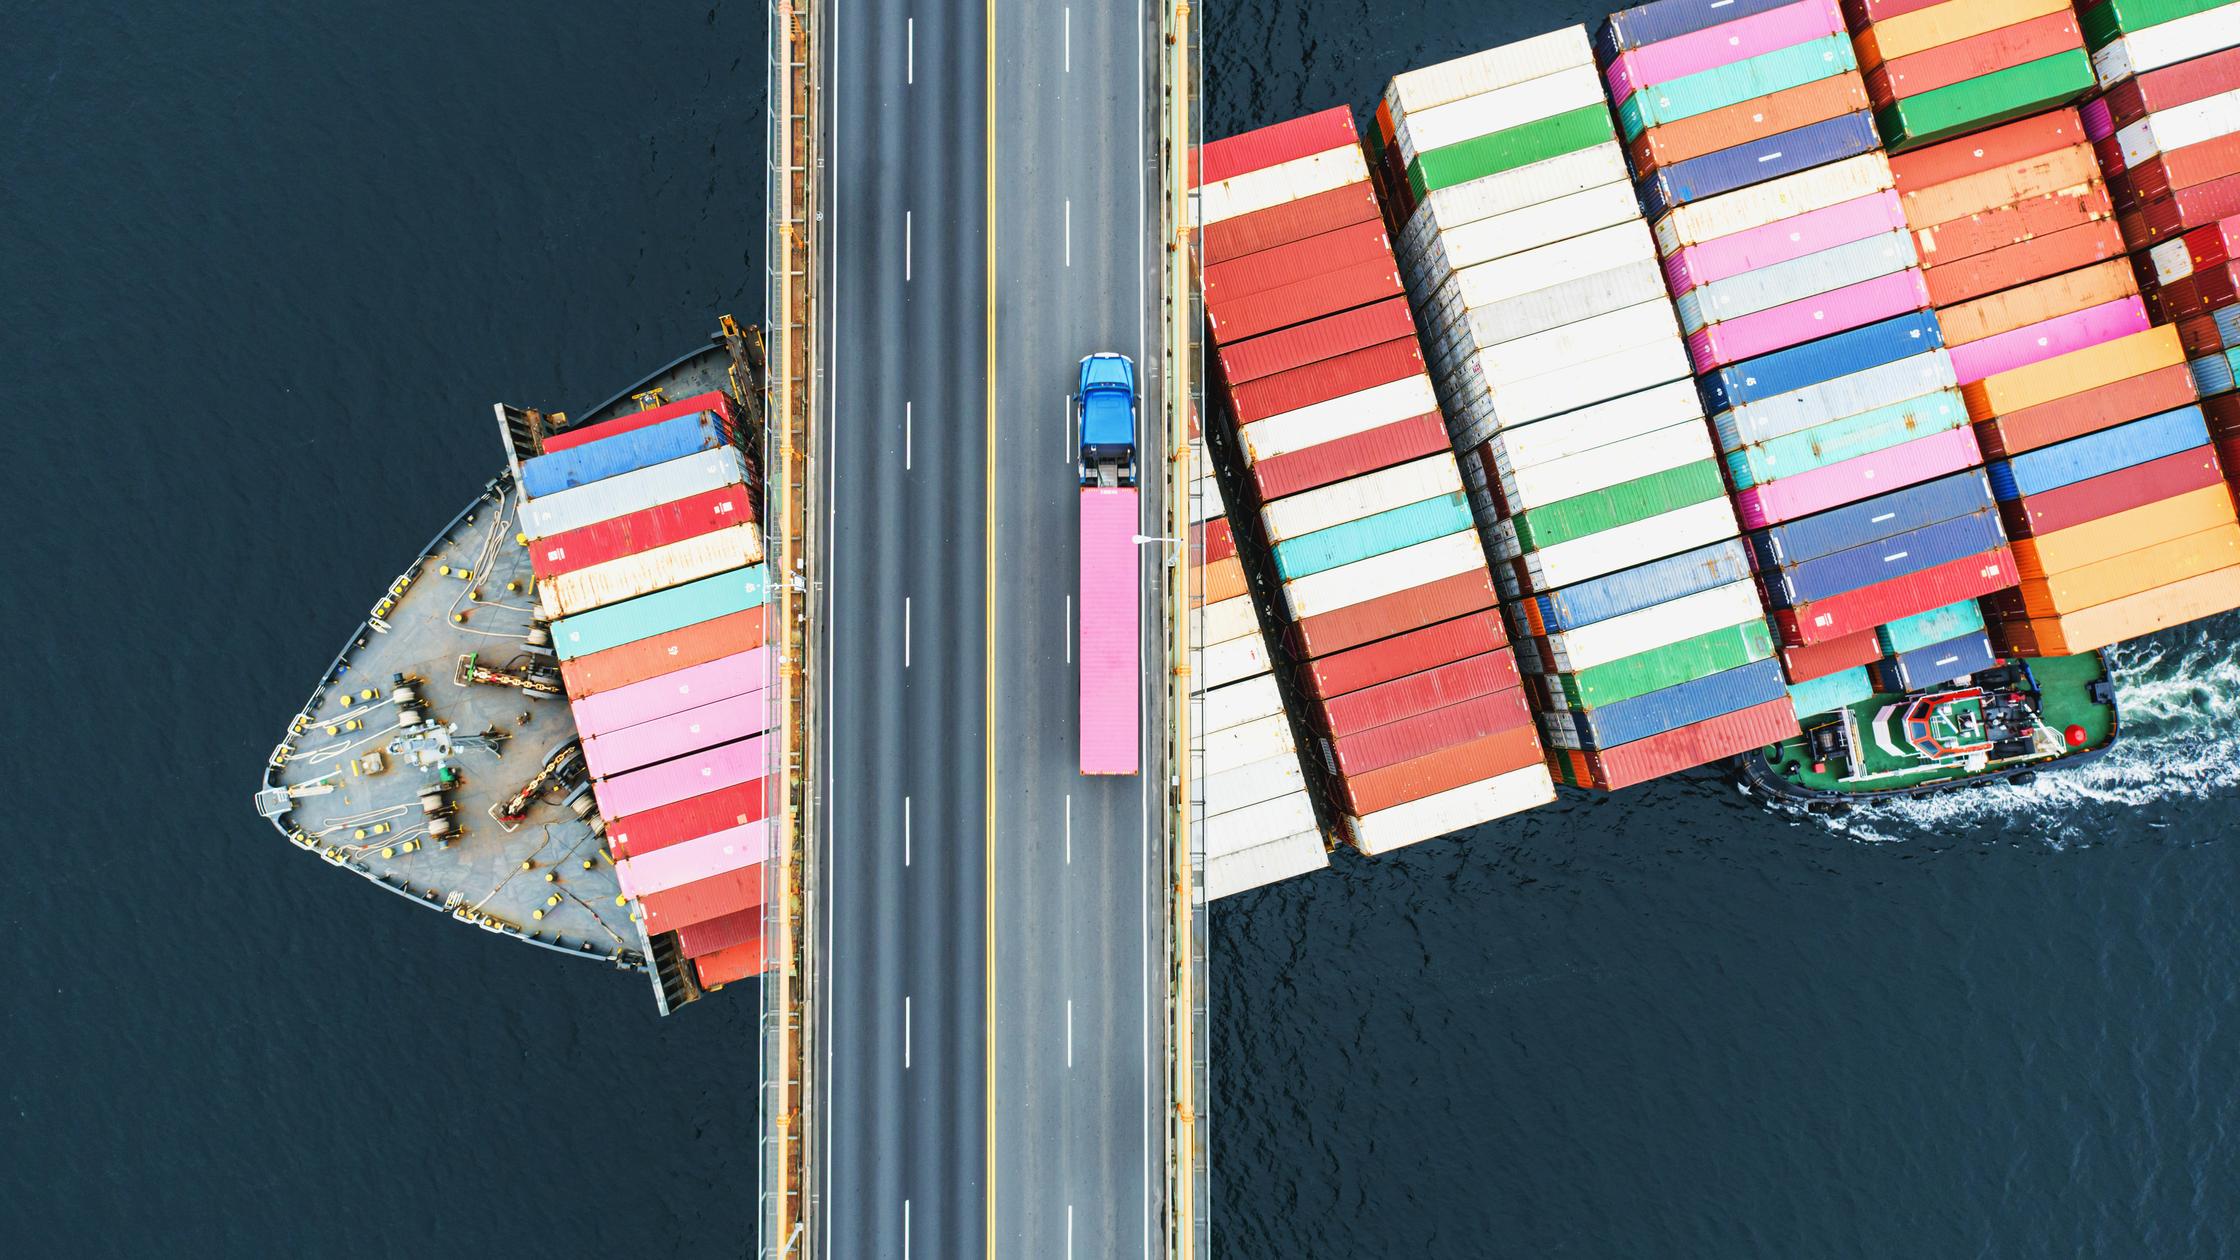 Aerial view of a container ship passing beneath a suspension bridge. Semi truck with pink cargo container crosses above.